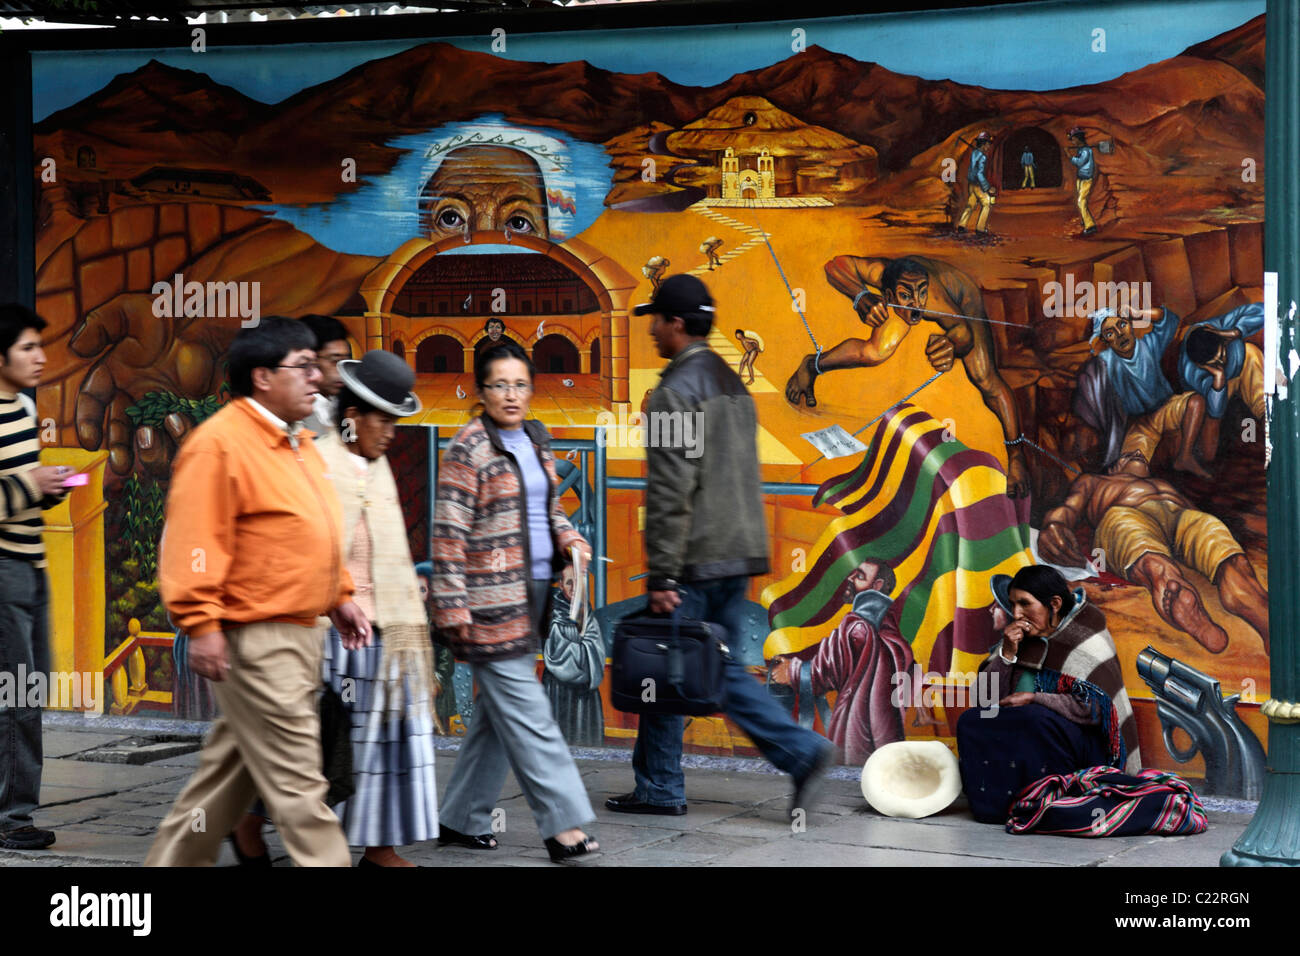 People walking past lady from Potosi region begging in front of mural showing repression of natives in Potosi silver mines in past, La Paz, Bolivia Stock Photo